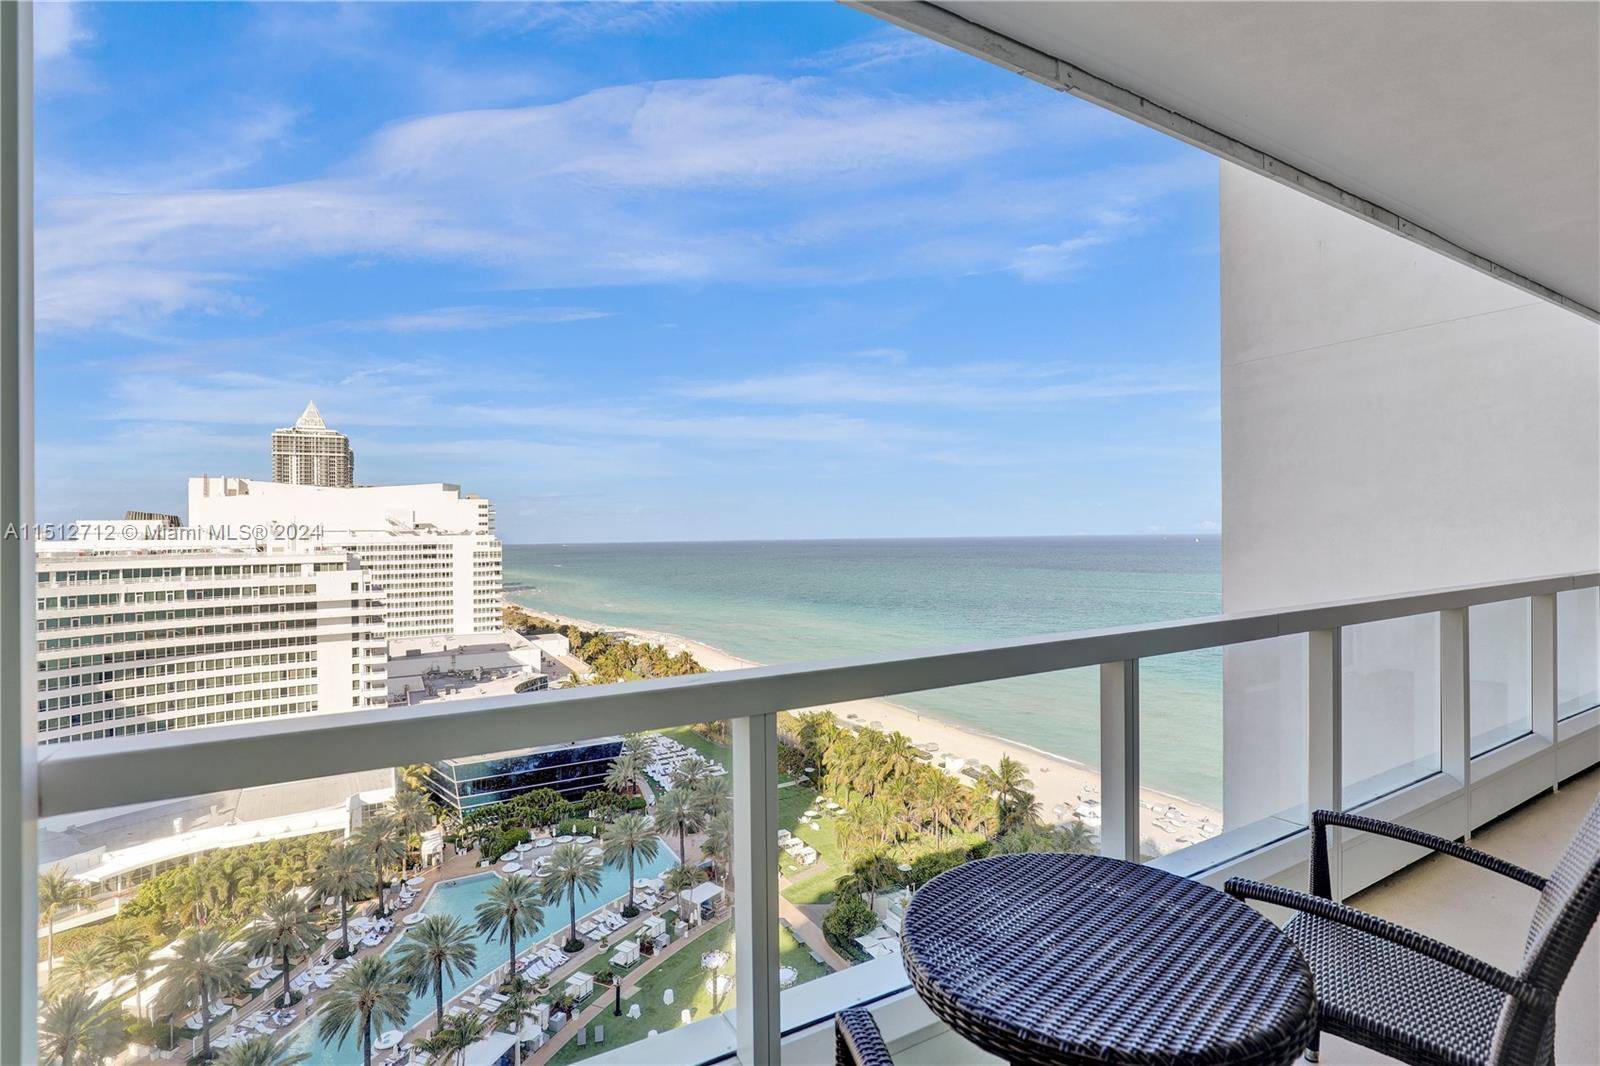 BEAUTIFUL 1 1, 5 BEDROOM AT WORLD FAMOUS FONTAINEBLEAU RESORT, OVERSIZED BALCONY OVERLOOKING TO THE OCEAN AND POOL.